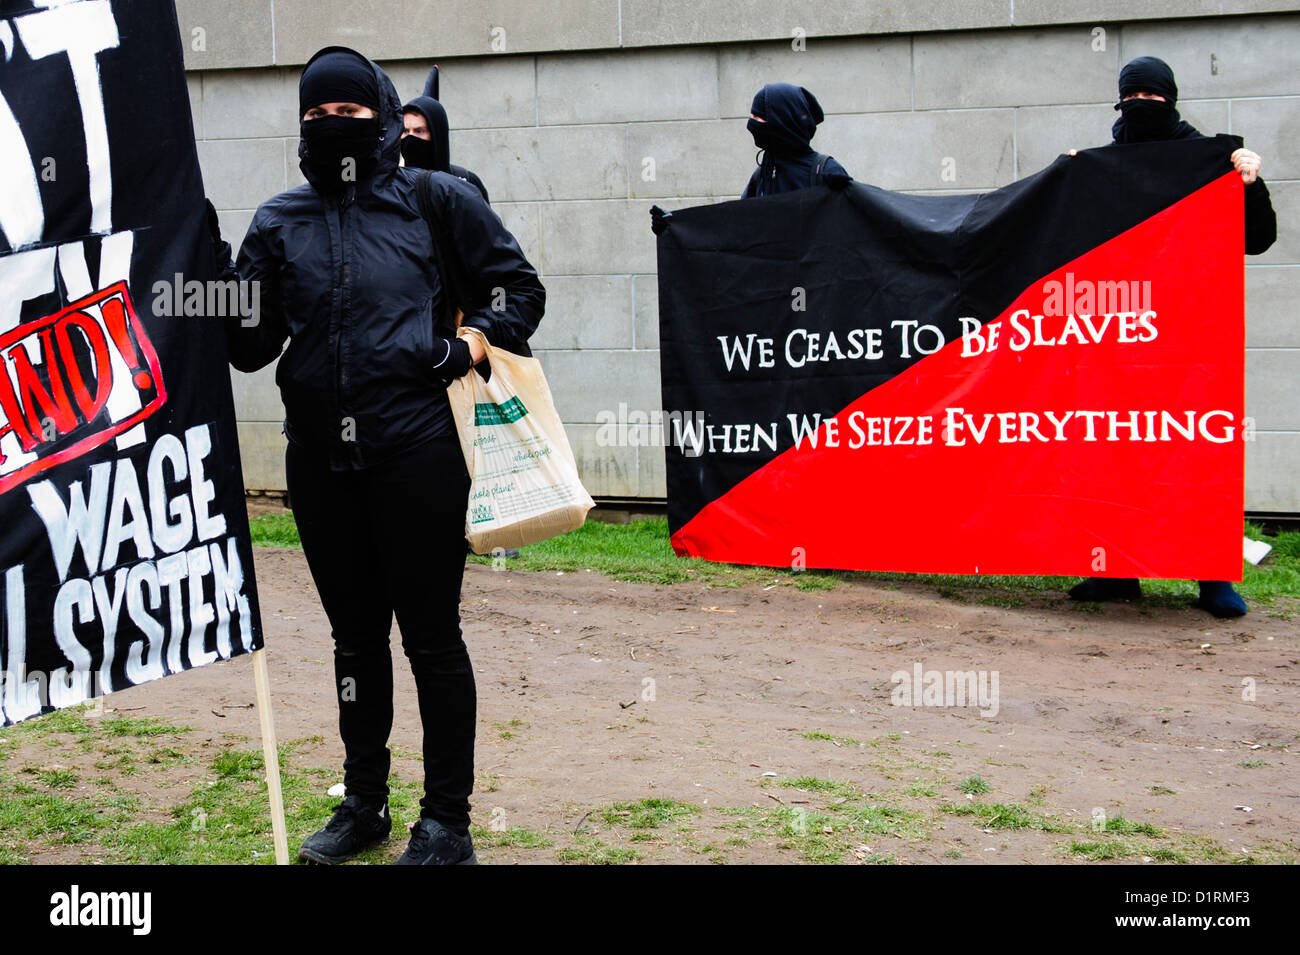 masked-anarchists-participated-in-the-may-day-re-occupy-toronto-march-D1RMF3.jpg